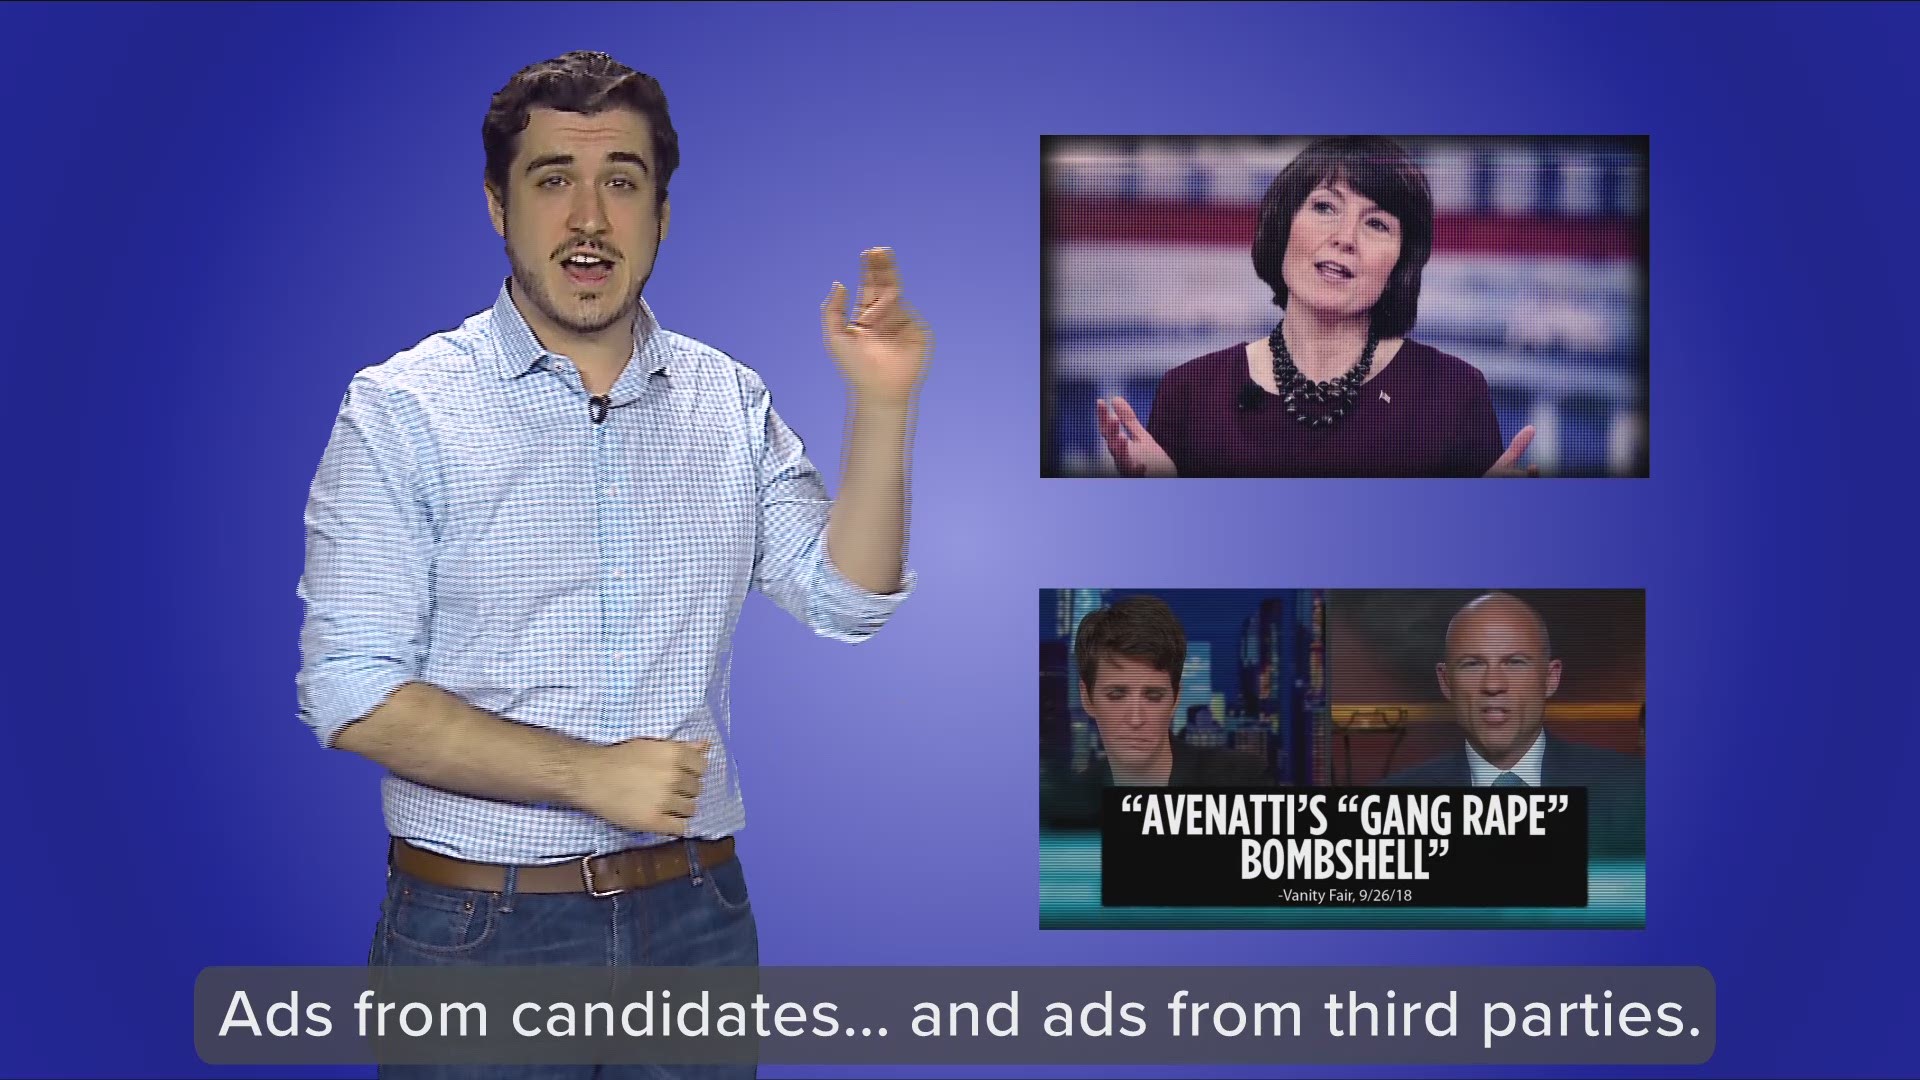 A breakdown of why TV stations air ads from candidates even if the claims are misleading.